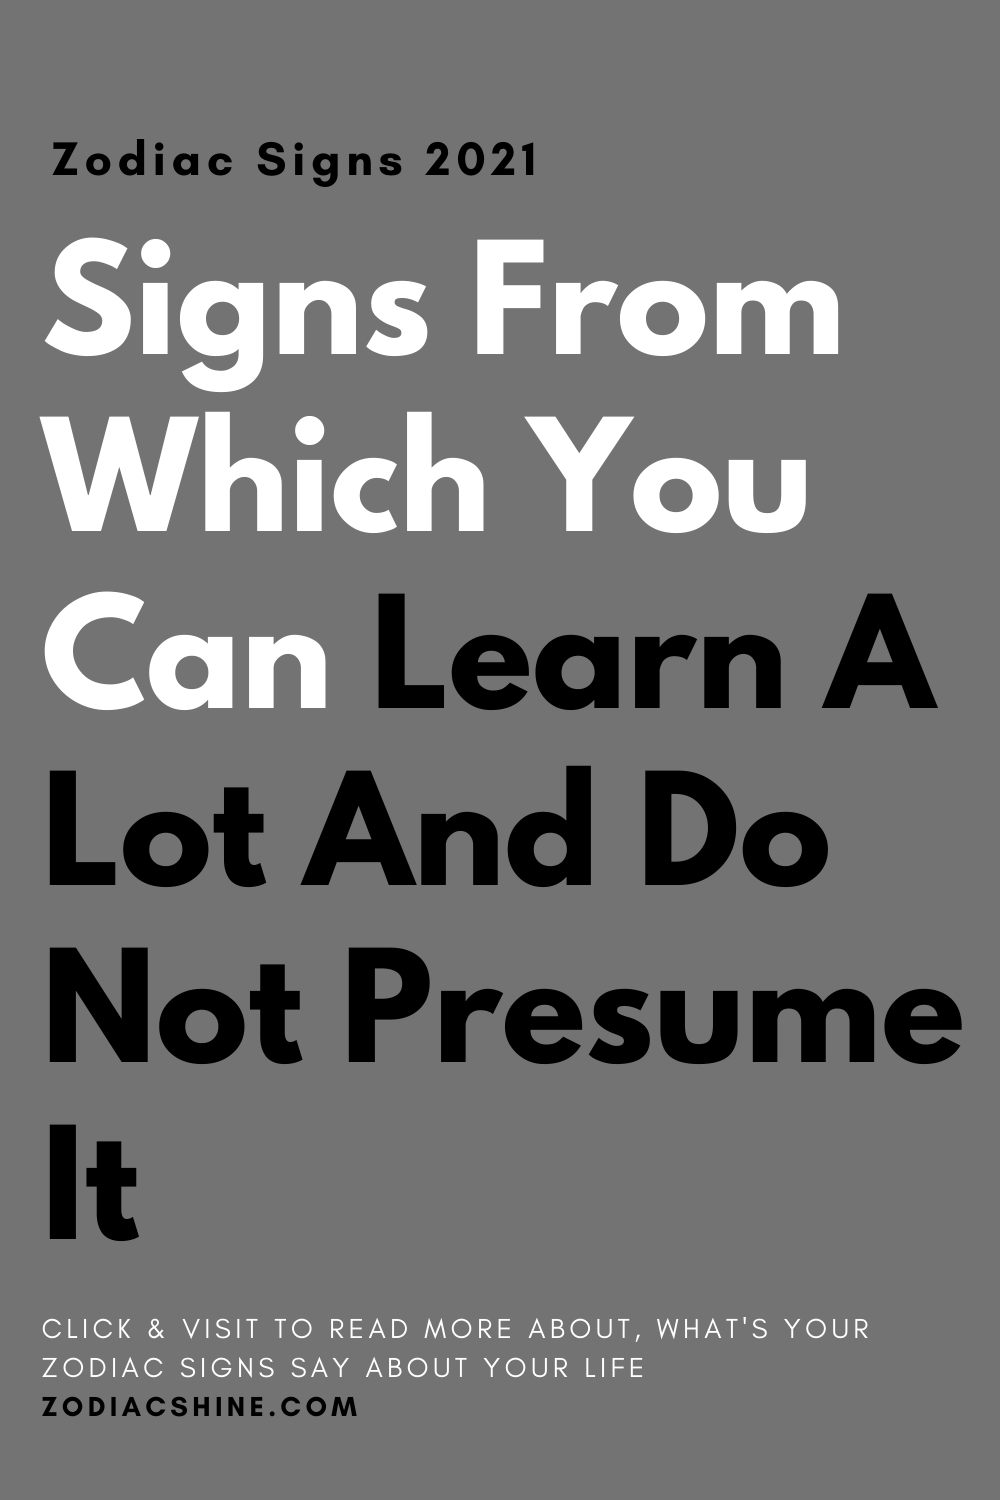 Signs From Which You Can Learn A Lot And Do Not Presume It